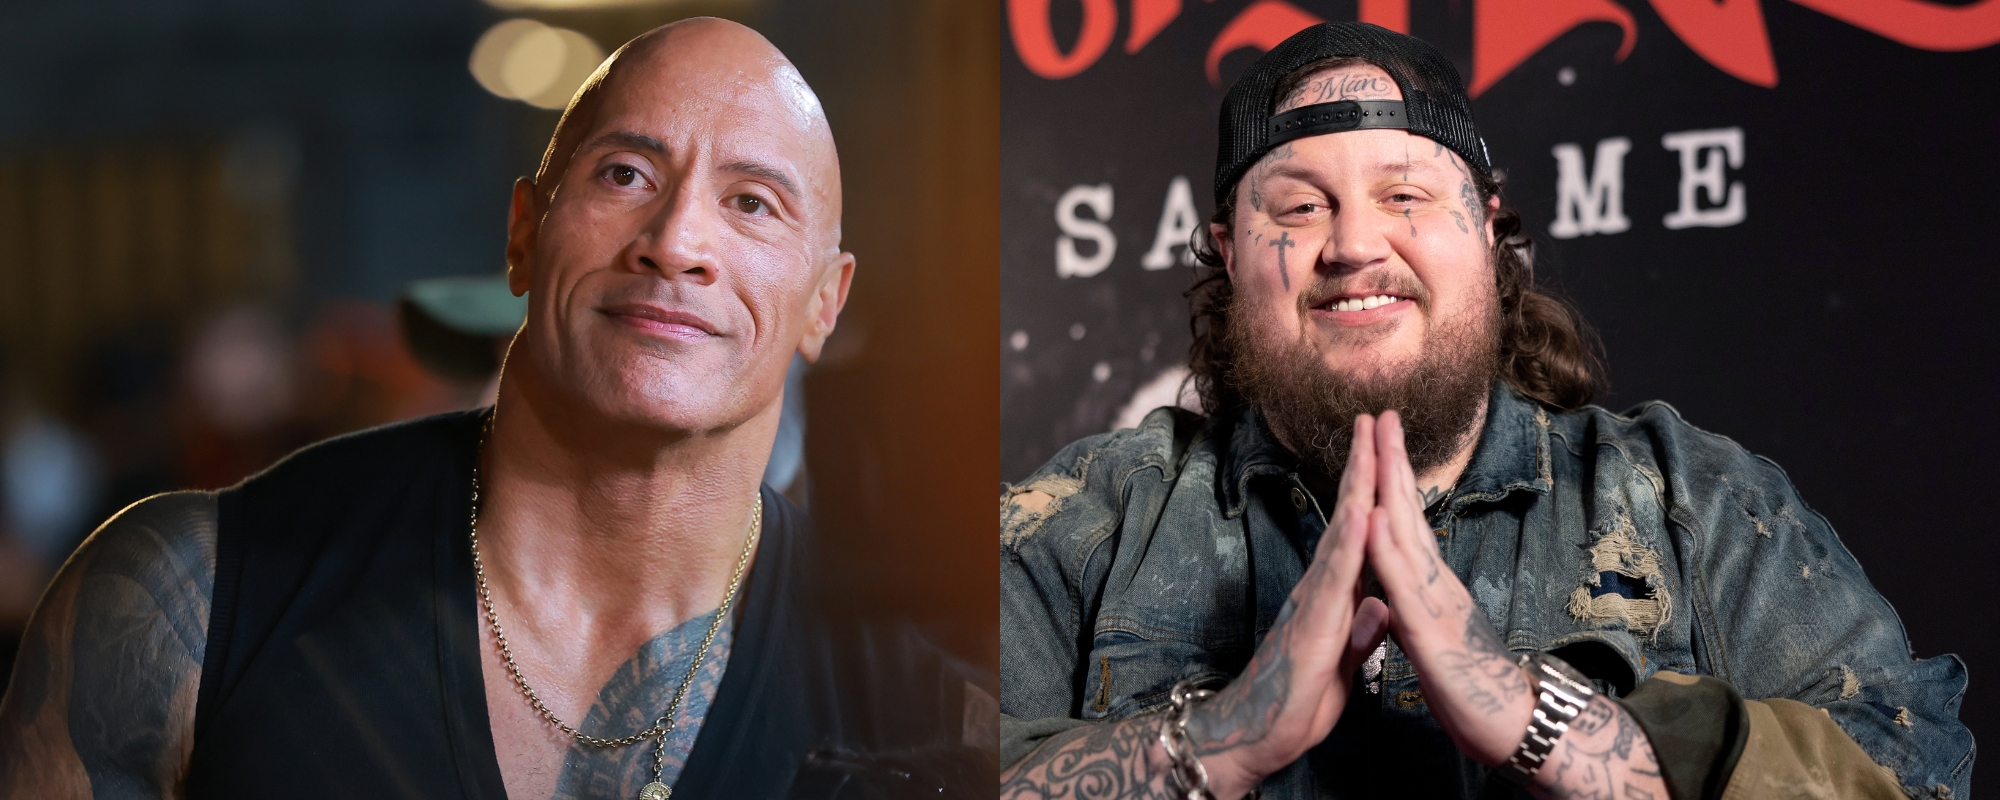 How Dwayne “The Rock” Johnson Became the “Anchor” for Jelly Roll’s Success: “He’s Really Been With Me From the Beginning”